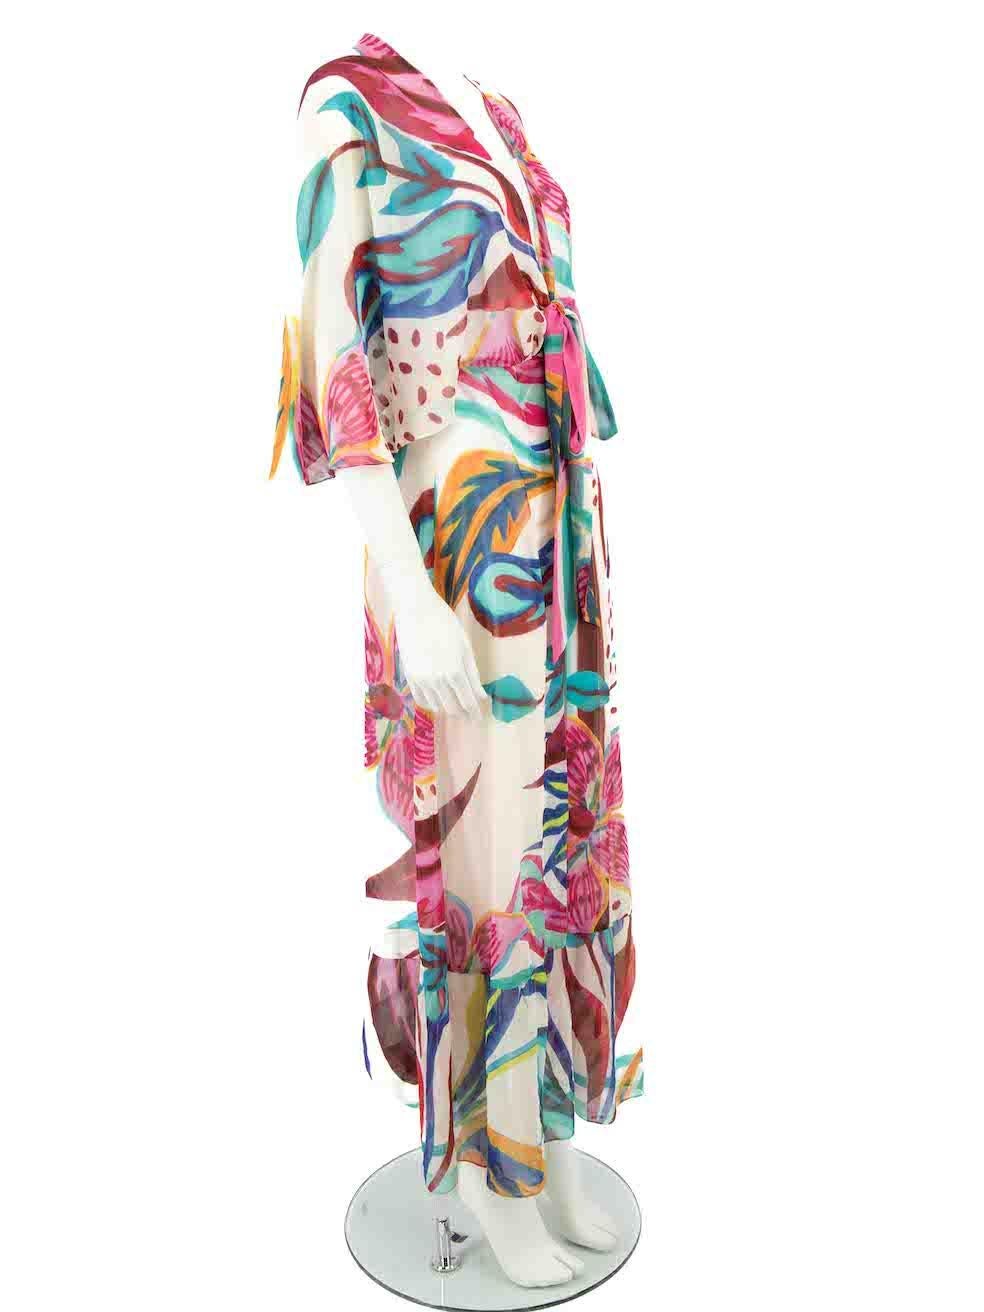 CONDITION is Very good. Hardly any visible wear to dress is evident on this used PatBO designer resale item.
 
 Details
 Multicolour
 Synthetic
 Cover up dress
 Maxi length
 Abstract printed
 Sheer
 V neckline
 Front tie strap closure
 Button